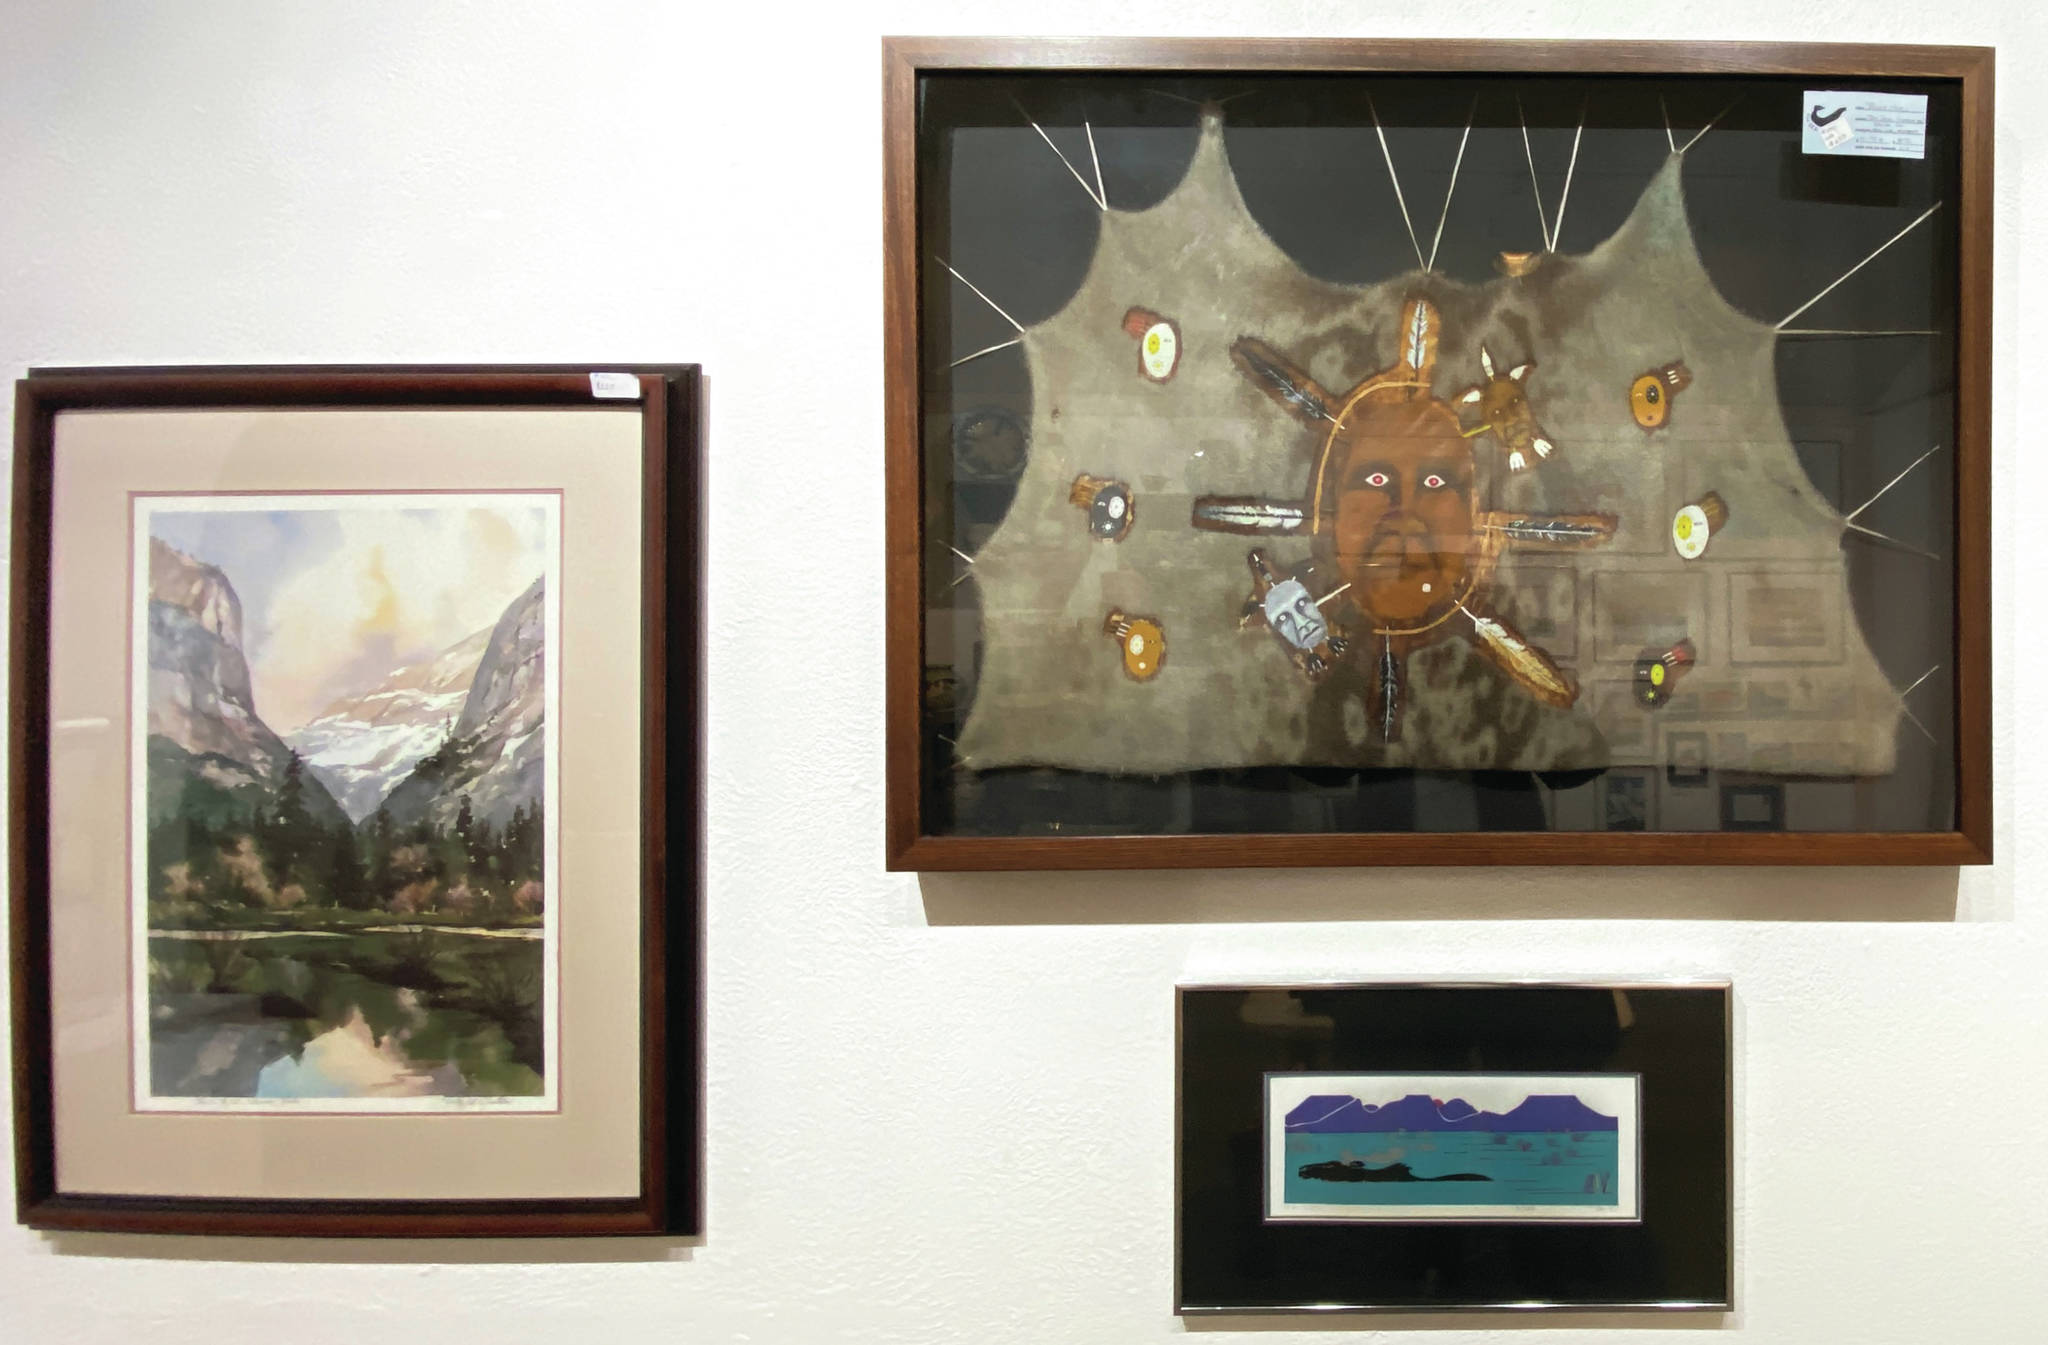 Some of the art in the scholarship fundraiser show opening Friday, March 5, 2021, at Ptarmigan Arts in Homer, Alaska. (Photo courtesy of Ptarmigan Arts)